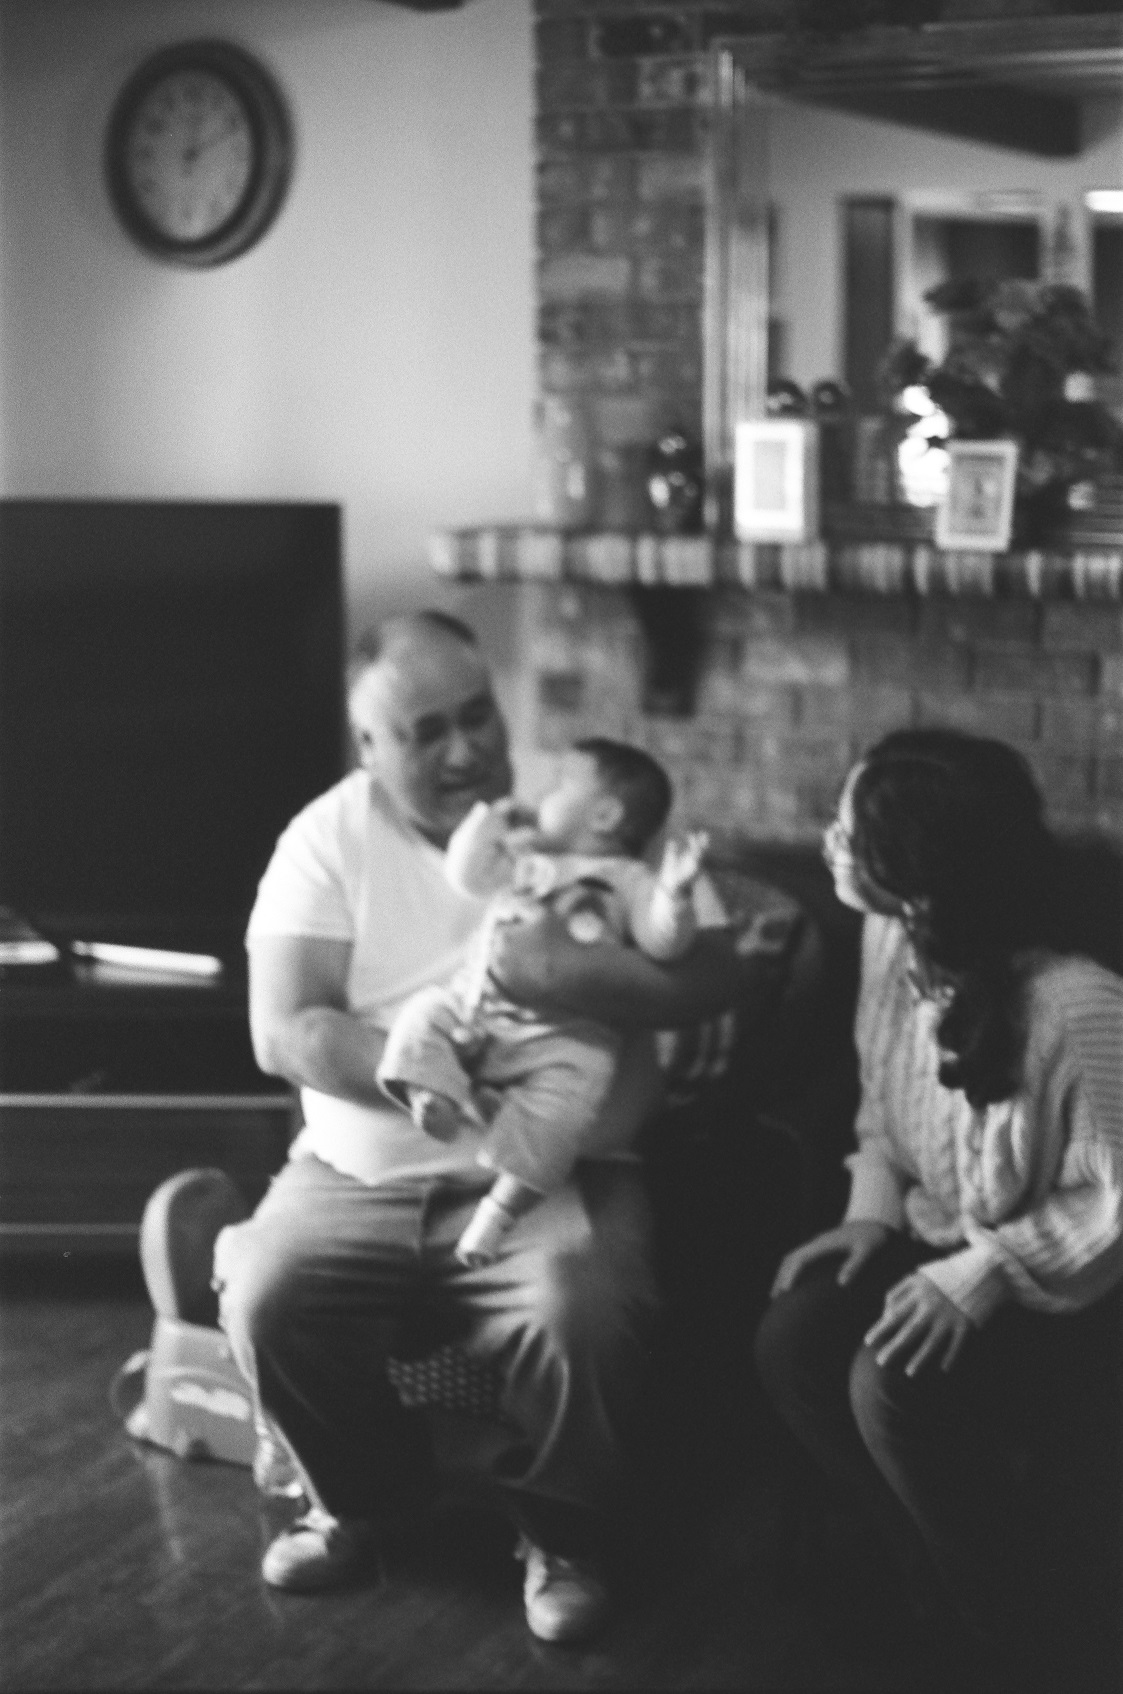 PICTURED: A black and white photo of one adult holding a baby while another watches.